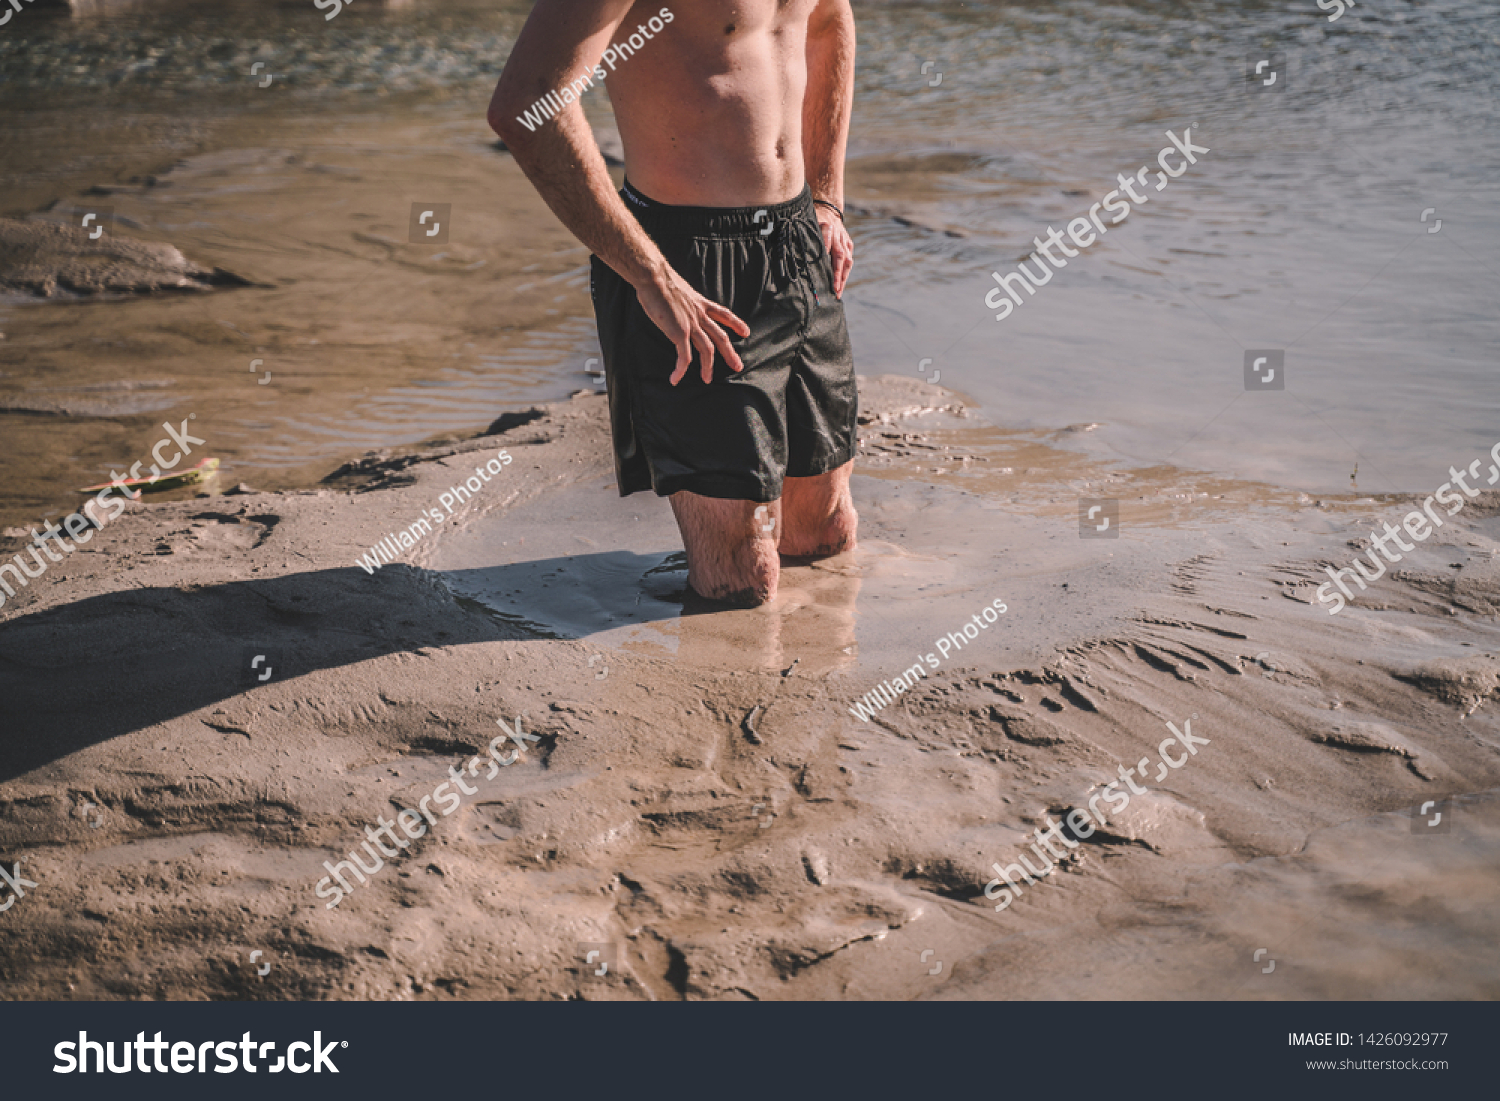 stock-photo-person-standing-in-natural-quicksand-river-clay-sediments-sinking-drowning-quick-sand-stuck-in-1426092977.jpg